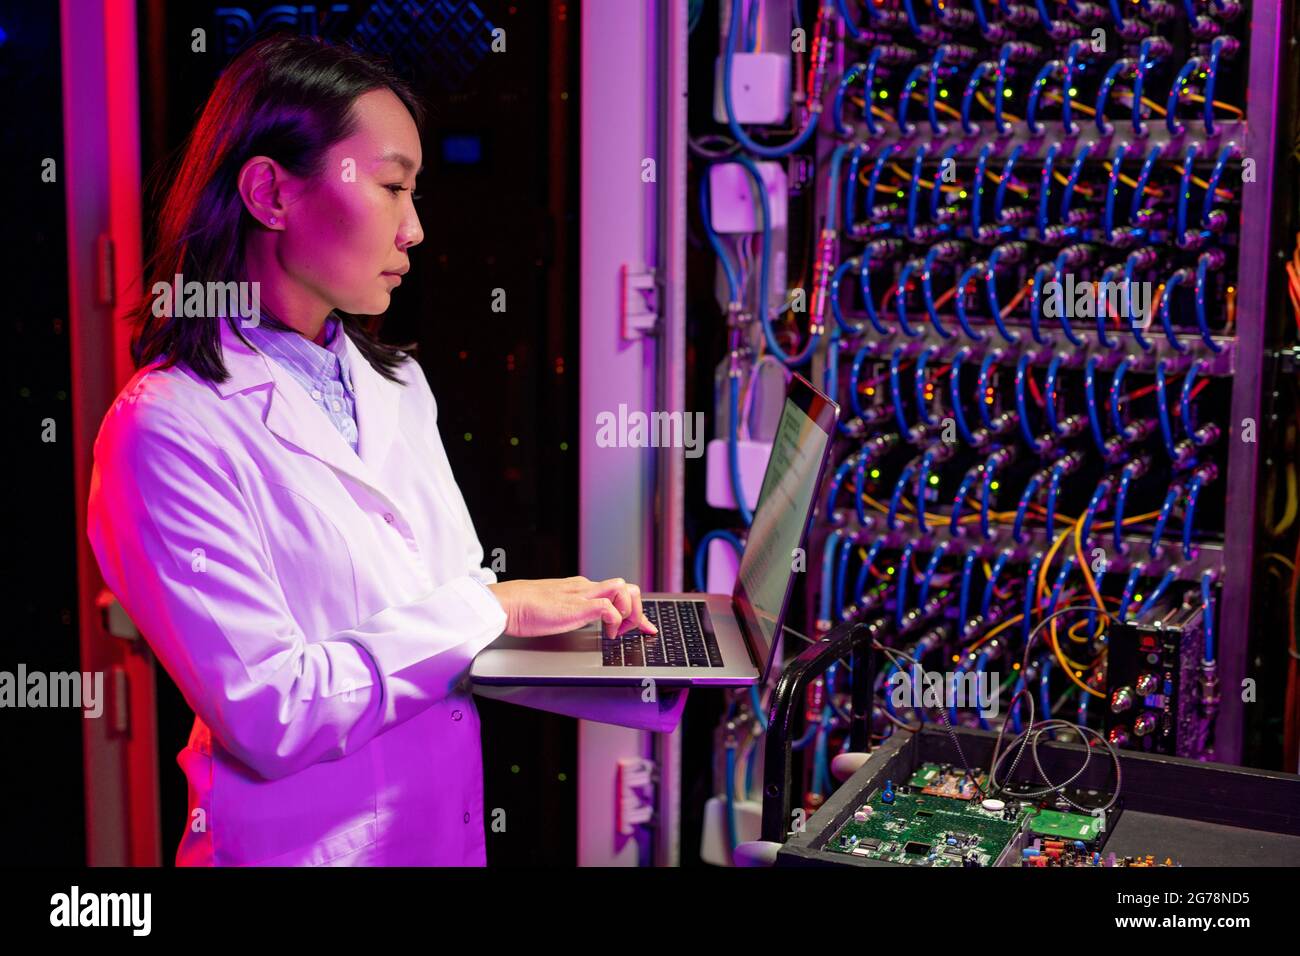 Serious busy young Asian female network engineer in lab coat standing at cart with circuit board connected to server and analyzing data on laptop Stock Photo